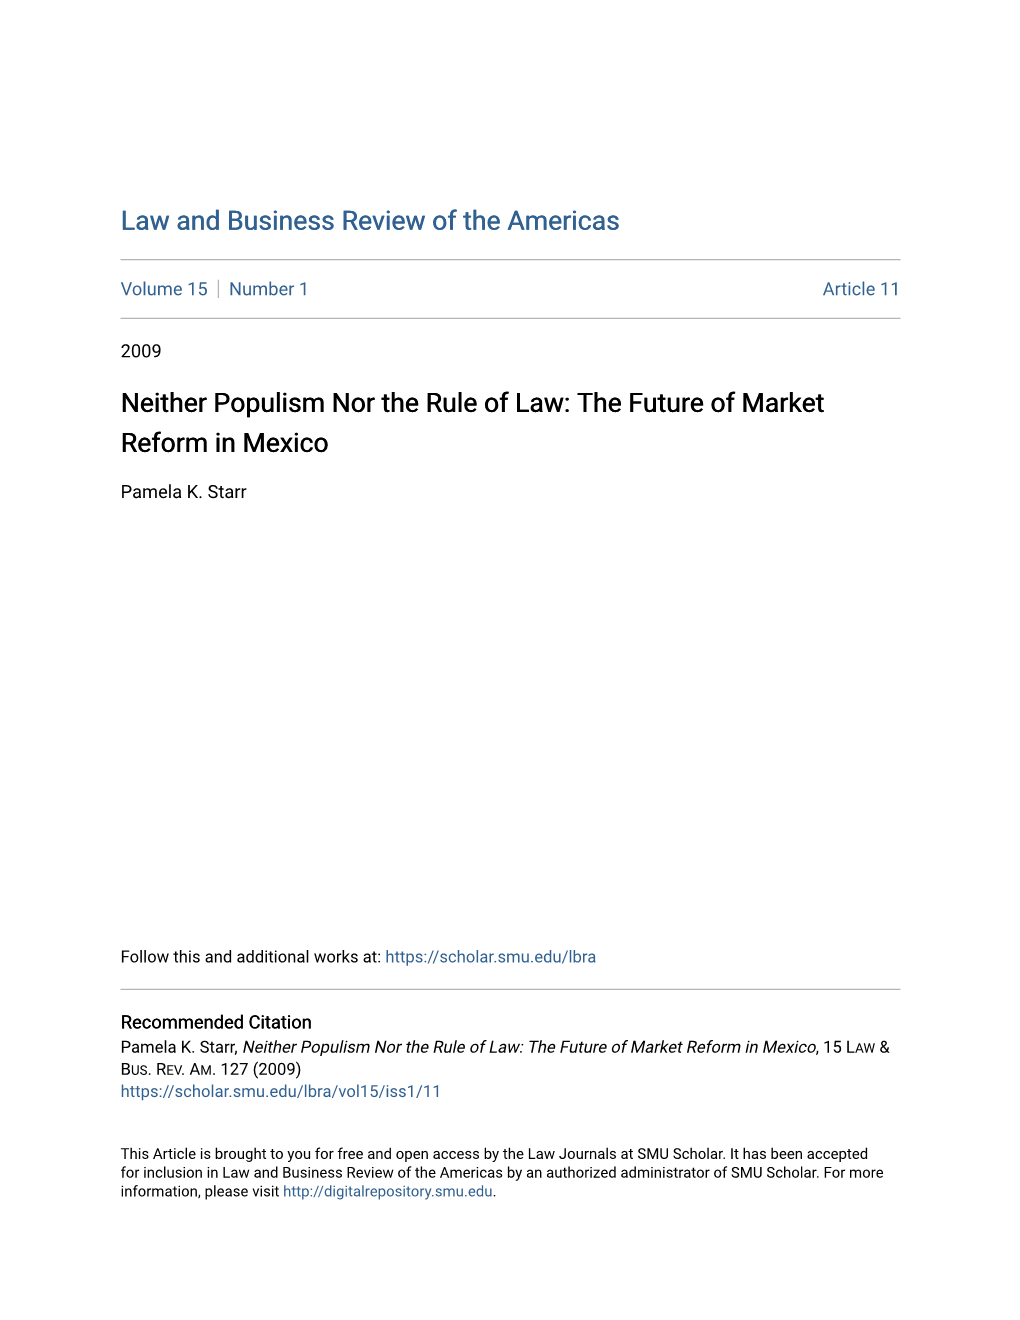 Neither Populism Nor the Rule of Law: the Future of Market Reform in Mexico